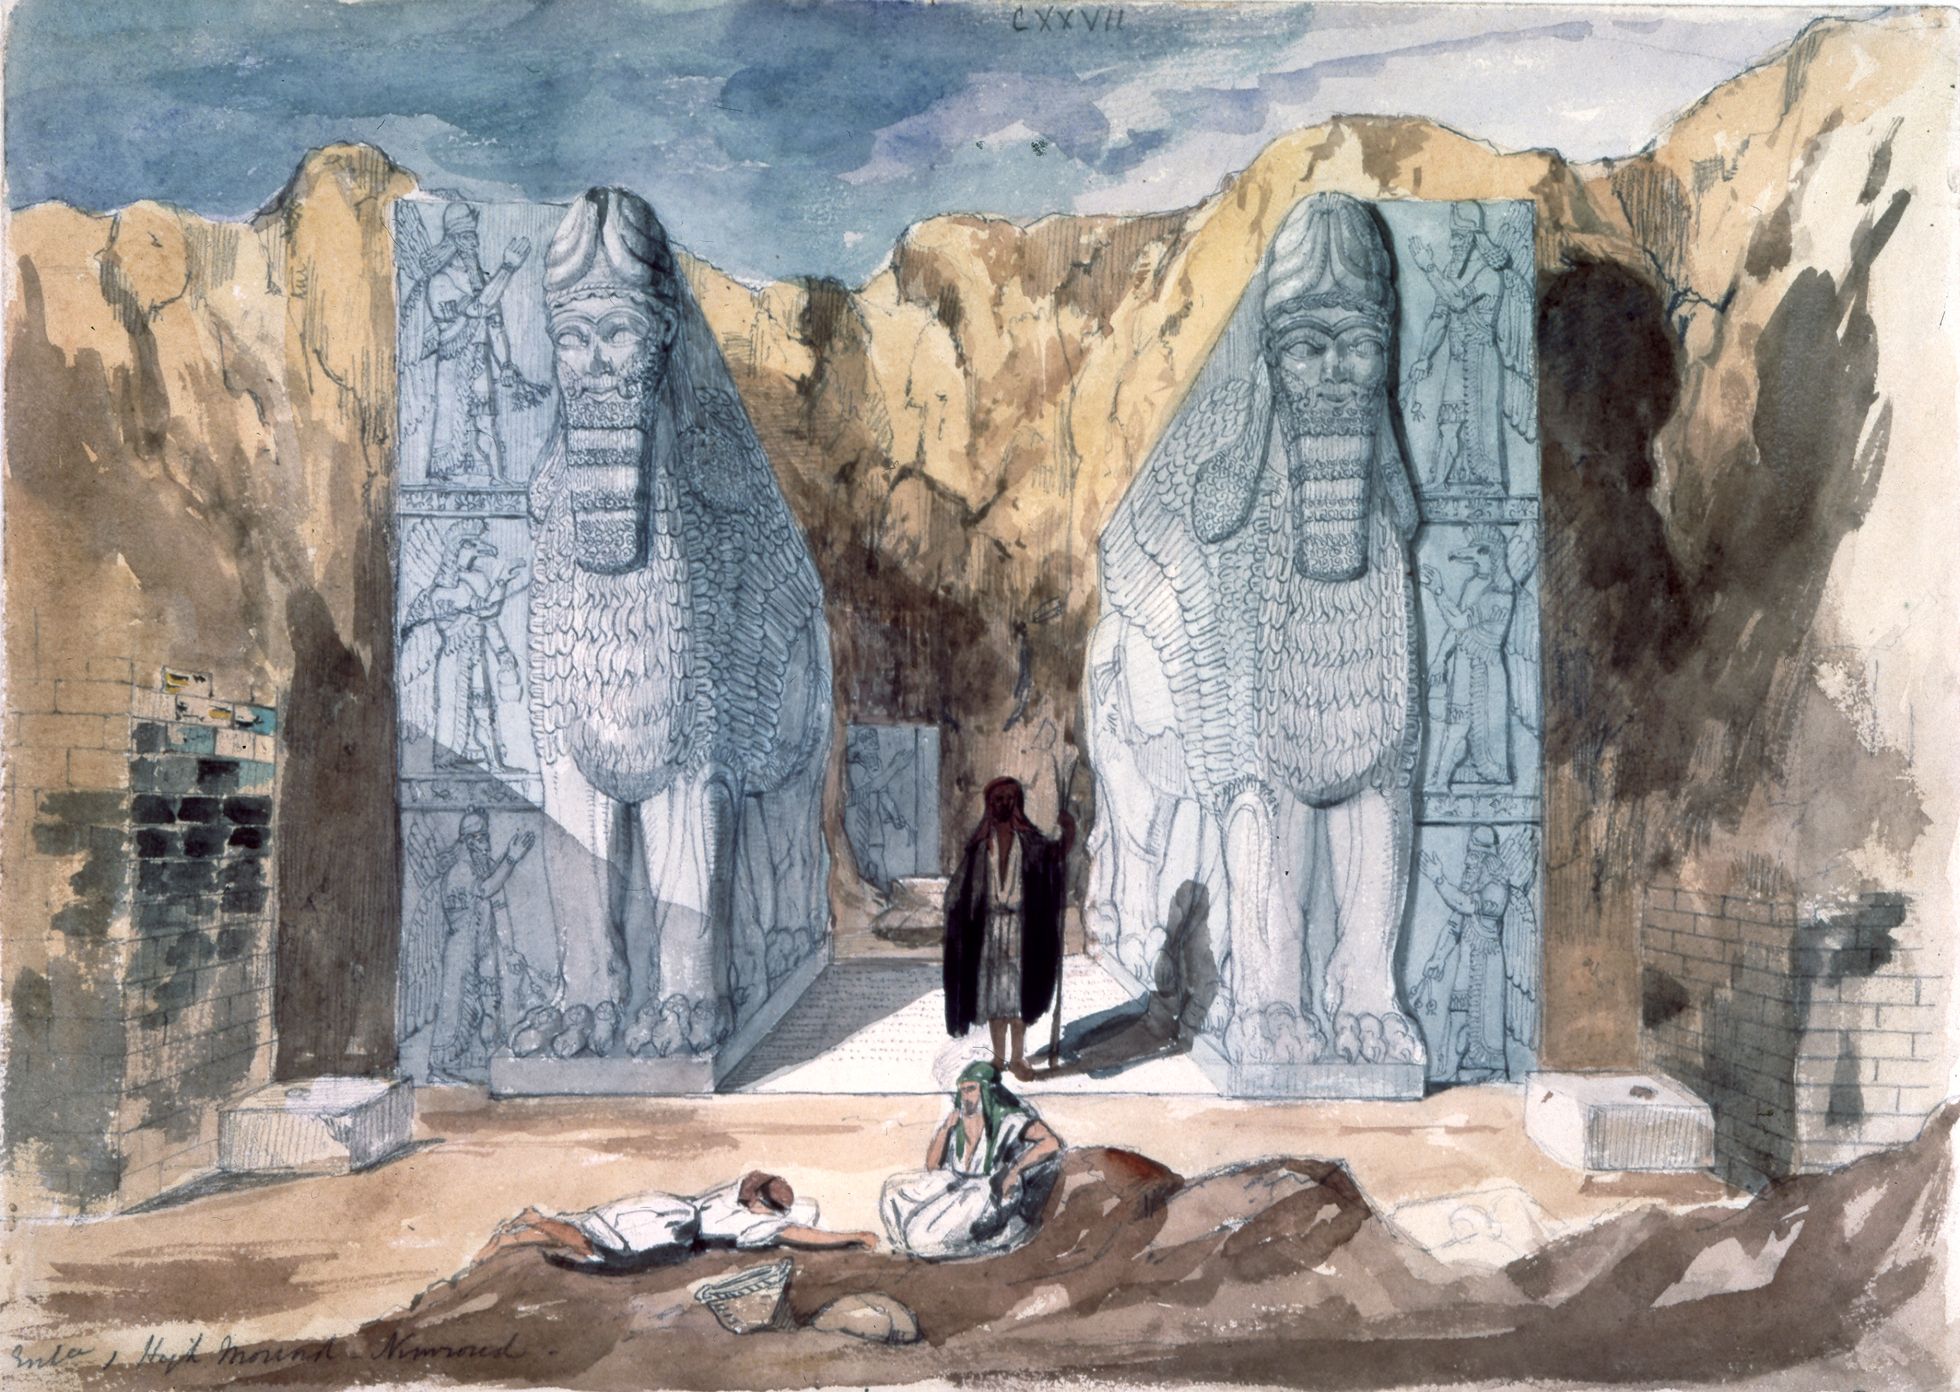 Discovery of Nimrud Frederick Charles Cooper (1810 – 1880), Nimrud, mid-19th century, watercolour on paper © The Trustees of the British Museum